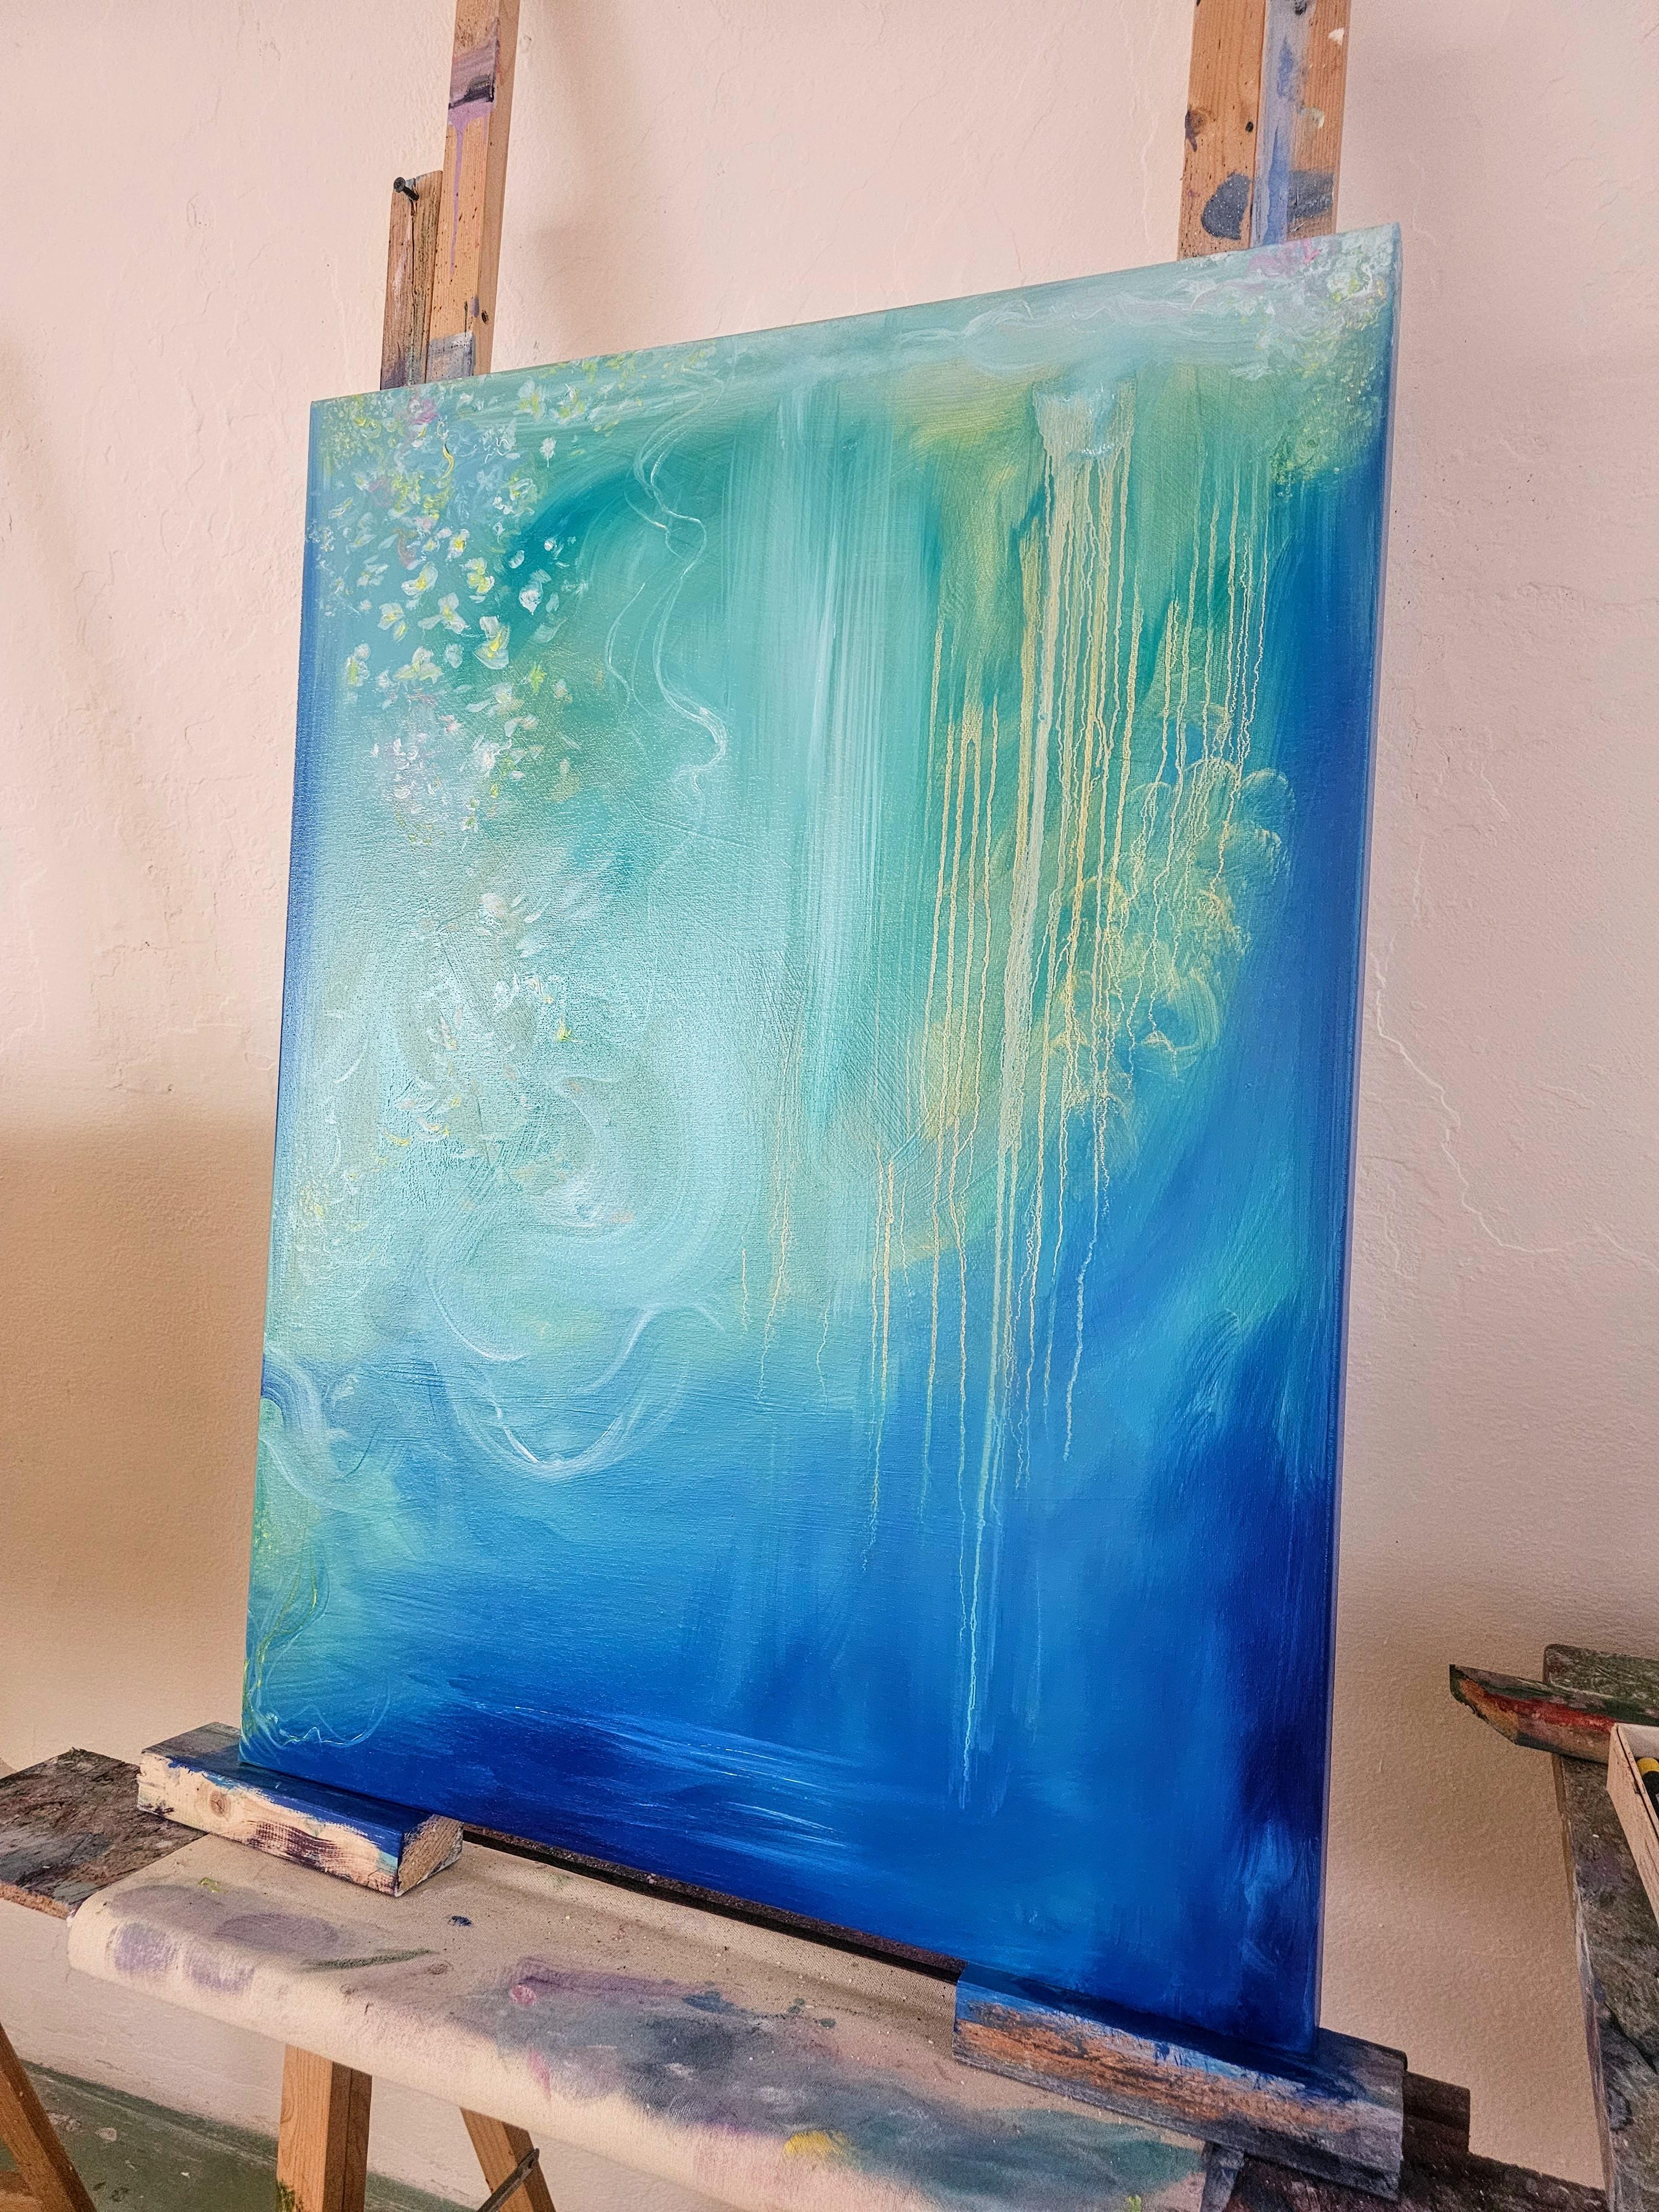 Jasmine of the sea - blue green abstract flowy sea painting For Sale 3